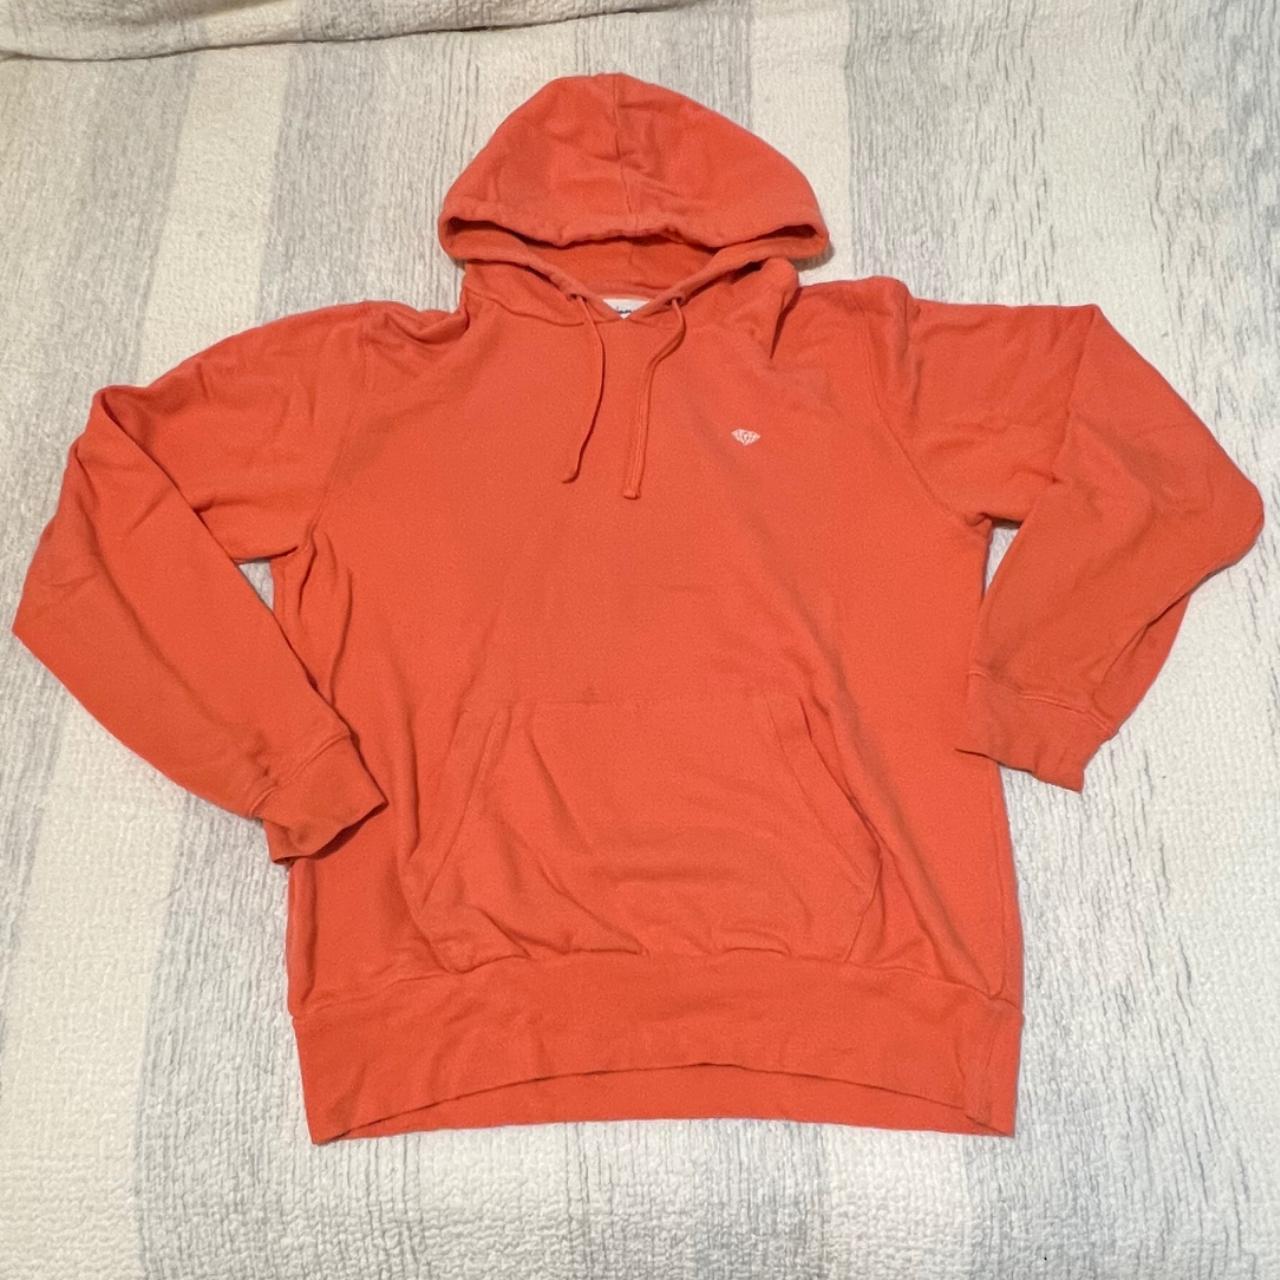 Diamond Supply Co., Oversized Hoodie, Great material